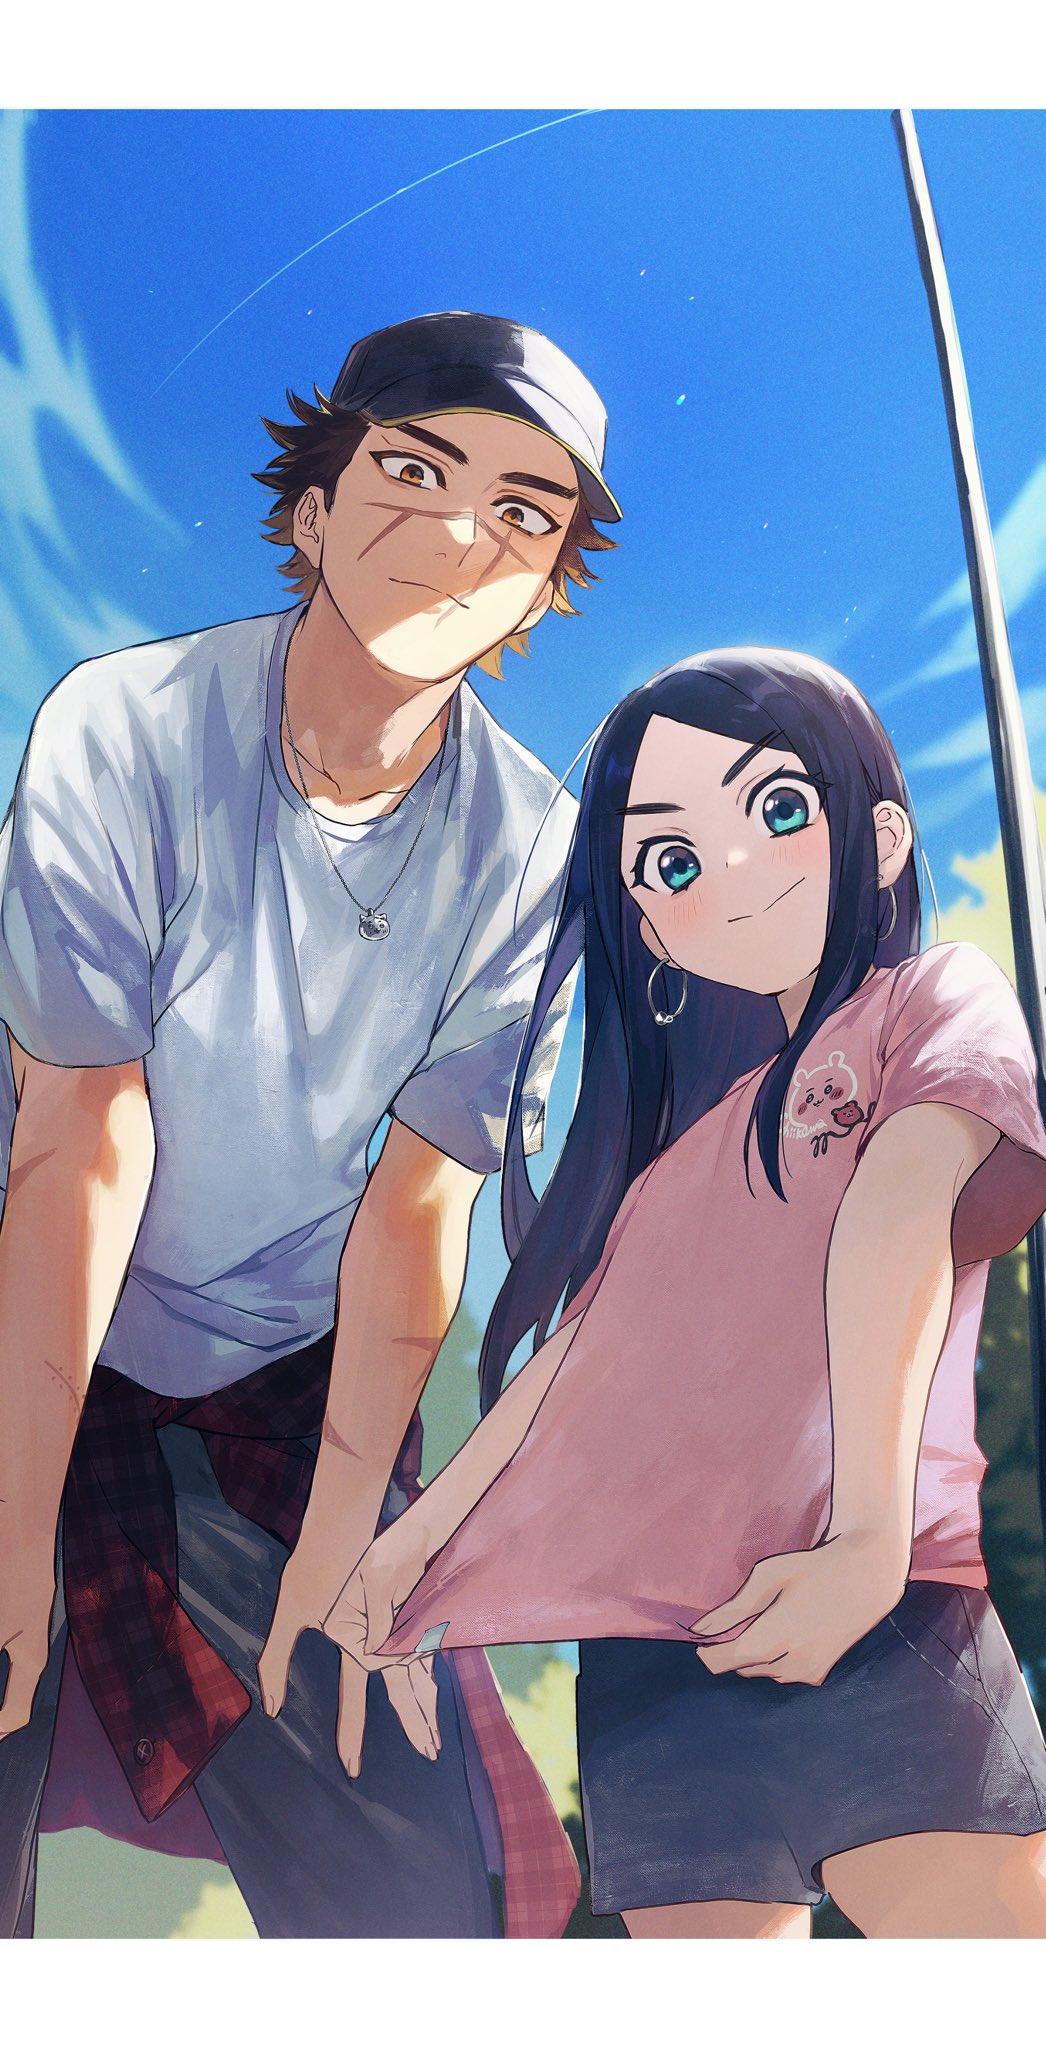 1boy 1girl alternate_costume asirpa bangs black_shorts blue_hair blue_shirt blue_sky blush brown_eyes brown_hair closed_mouth clothes_around_waist clouds cloudy_sky collarbone commentary_request contemporary dark_blue_hair day denim denim_shorts earrings fingernails framed golden_kamuy green_eyes grey_pants hat height_difference highres hoop_earrings jacket jacket_around_waist jewelry long_hair looking_at_viewer multiple_scars outdoors oziozi_kamuy pants parted_bangs pendant pink_shirt scar scar_on_arm scar_on_cheek scar_on_face scar_on_mouth scar_on_nose shaded_face shirt short_hair short_sleeves shorts sky smile standing sugimoto_saichi sun t-shirt